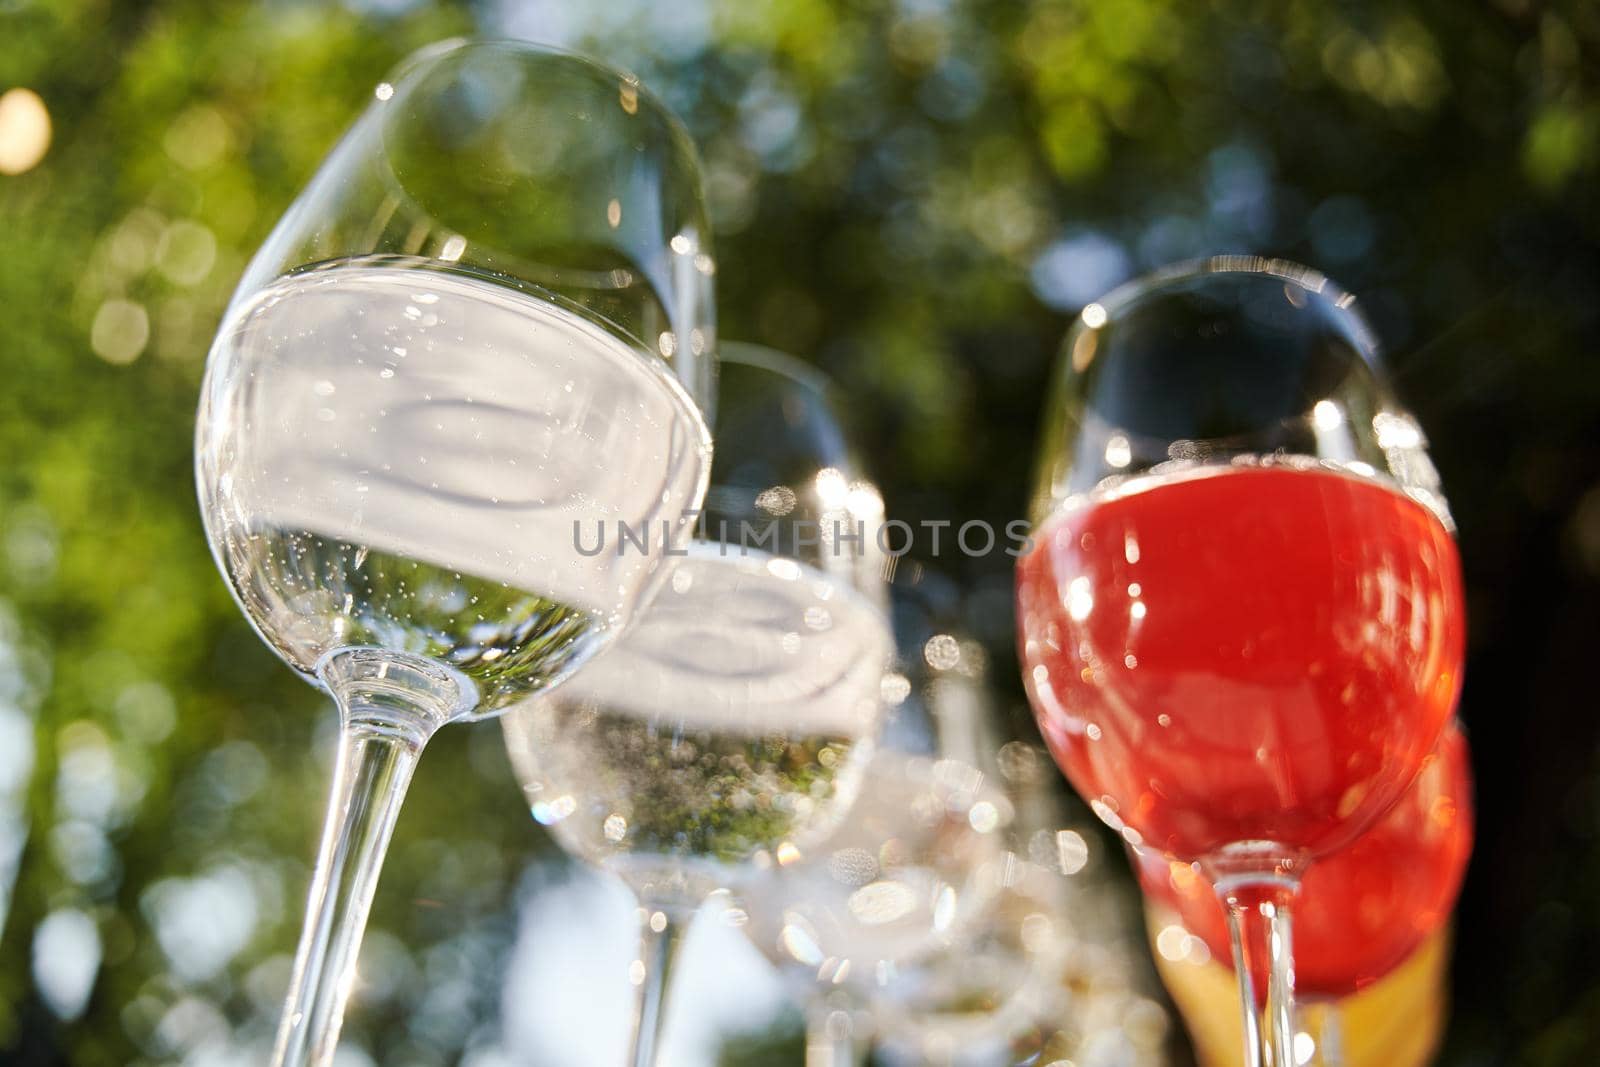 Table set for an event party or wedding reception. Banquet table design. Festive glasses with champagne and white wine.